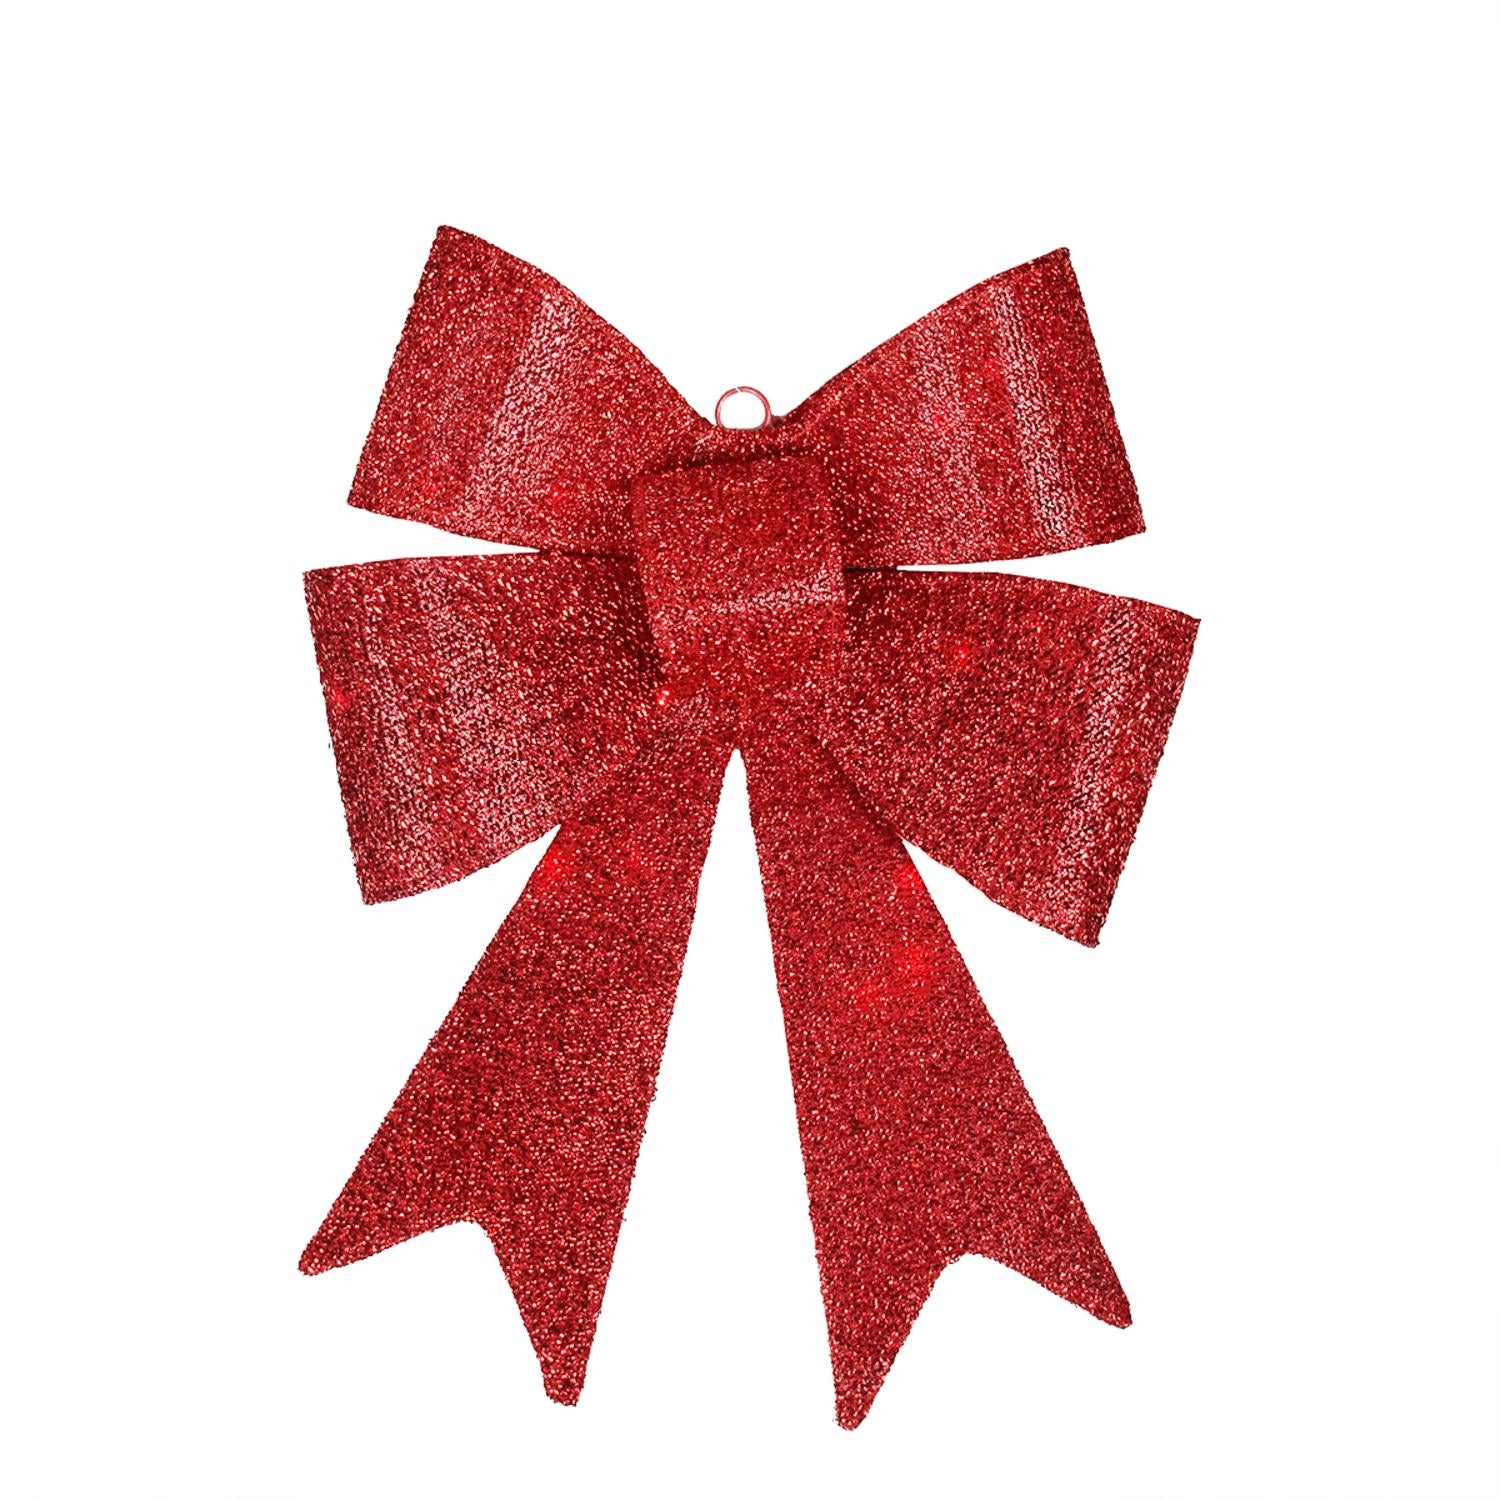 17" Led Lighted Battery Operated Vibrant Red Bow Christmas Decoration - Warm Clear Lights Penn